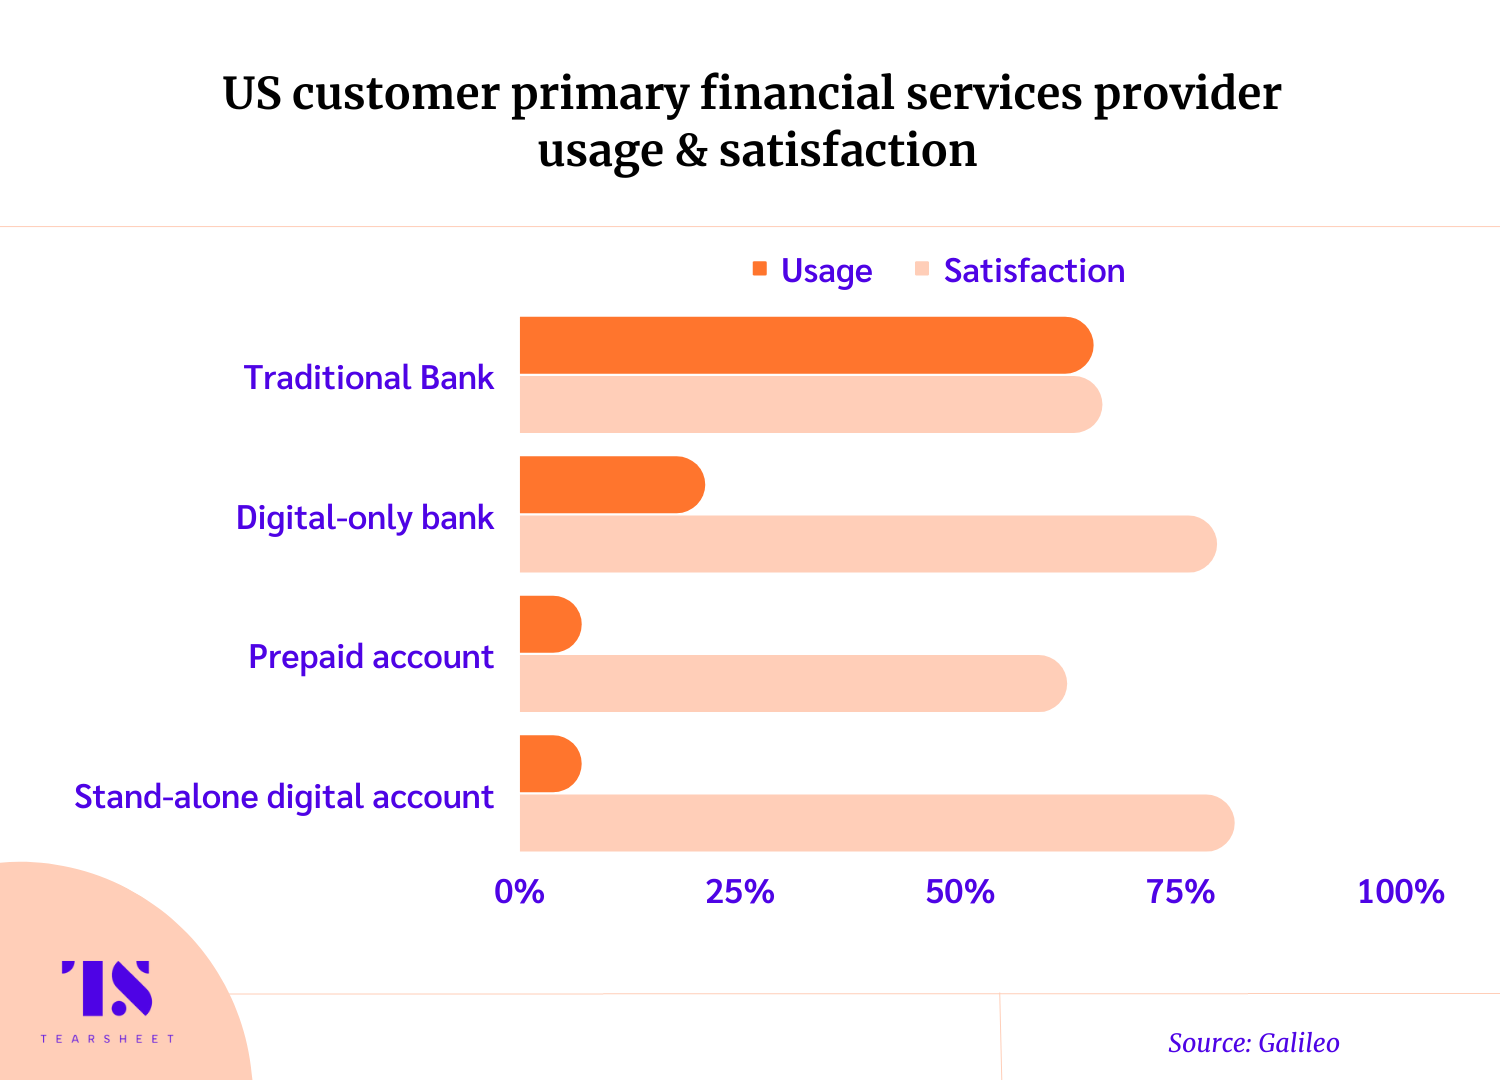 US customer primary financial services provider usage and satisfaction